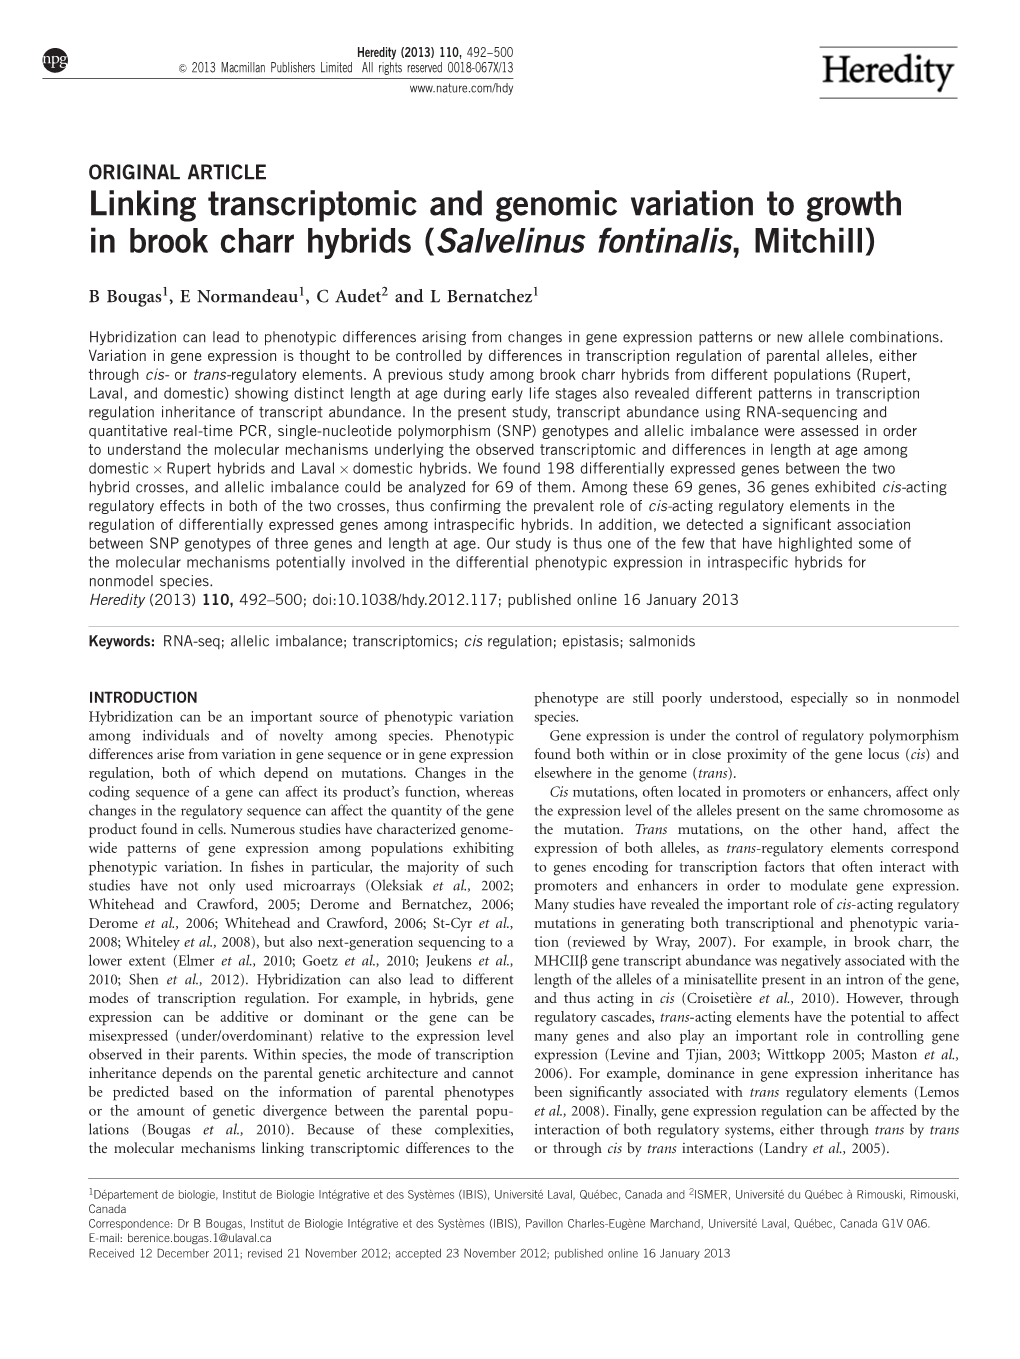 Linking Transcriptomic and Genomic Variation to Growth in Brook Charr Hybrids (Salvelinus Fontinalis, Mitchill)